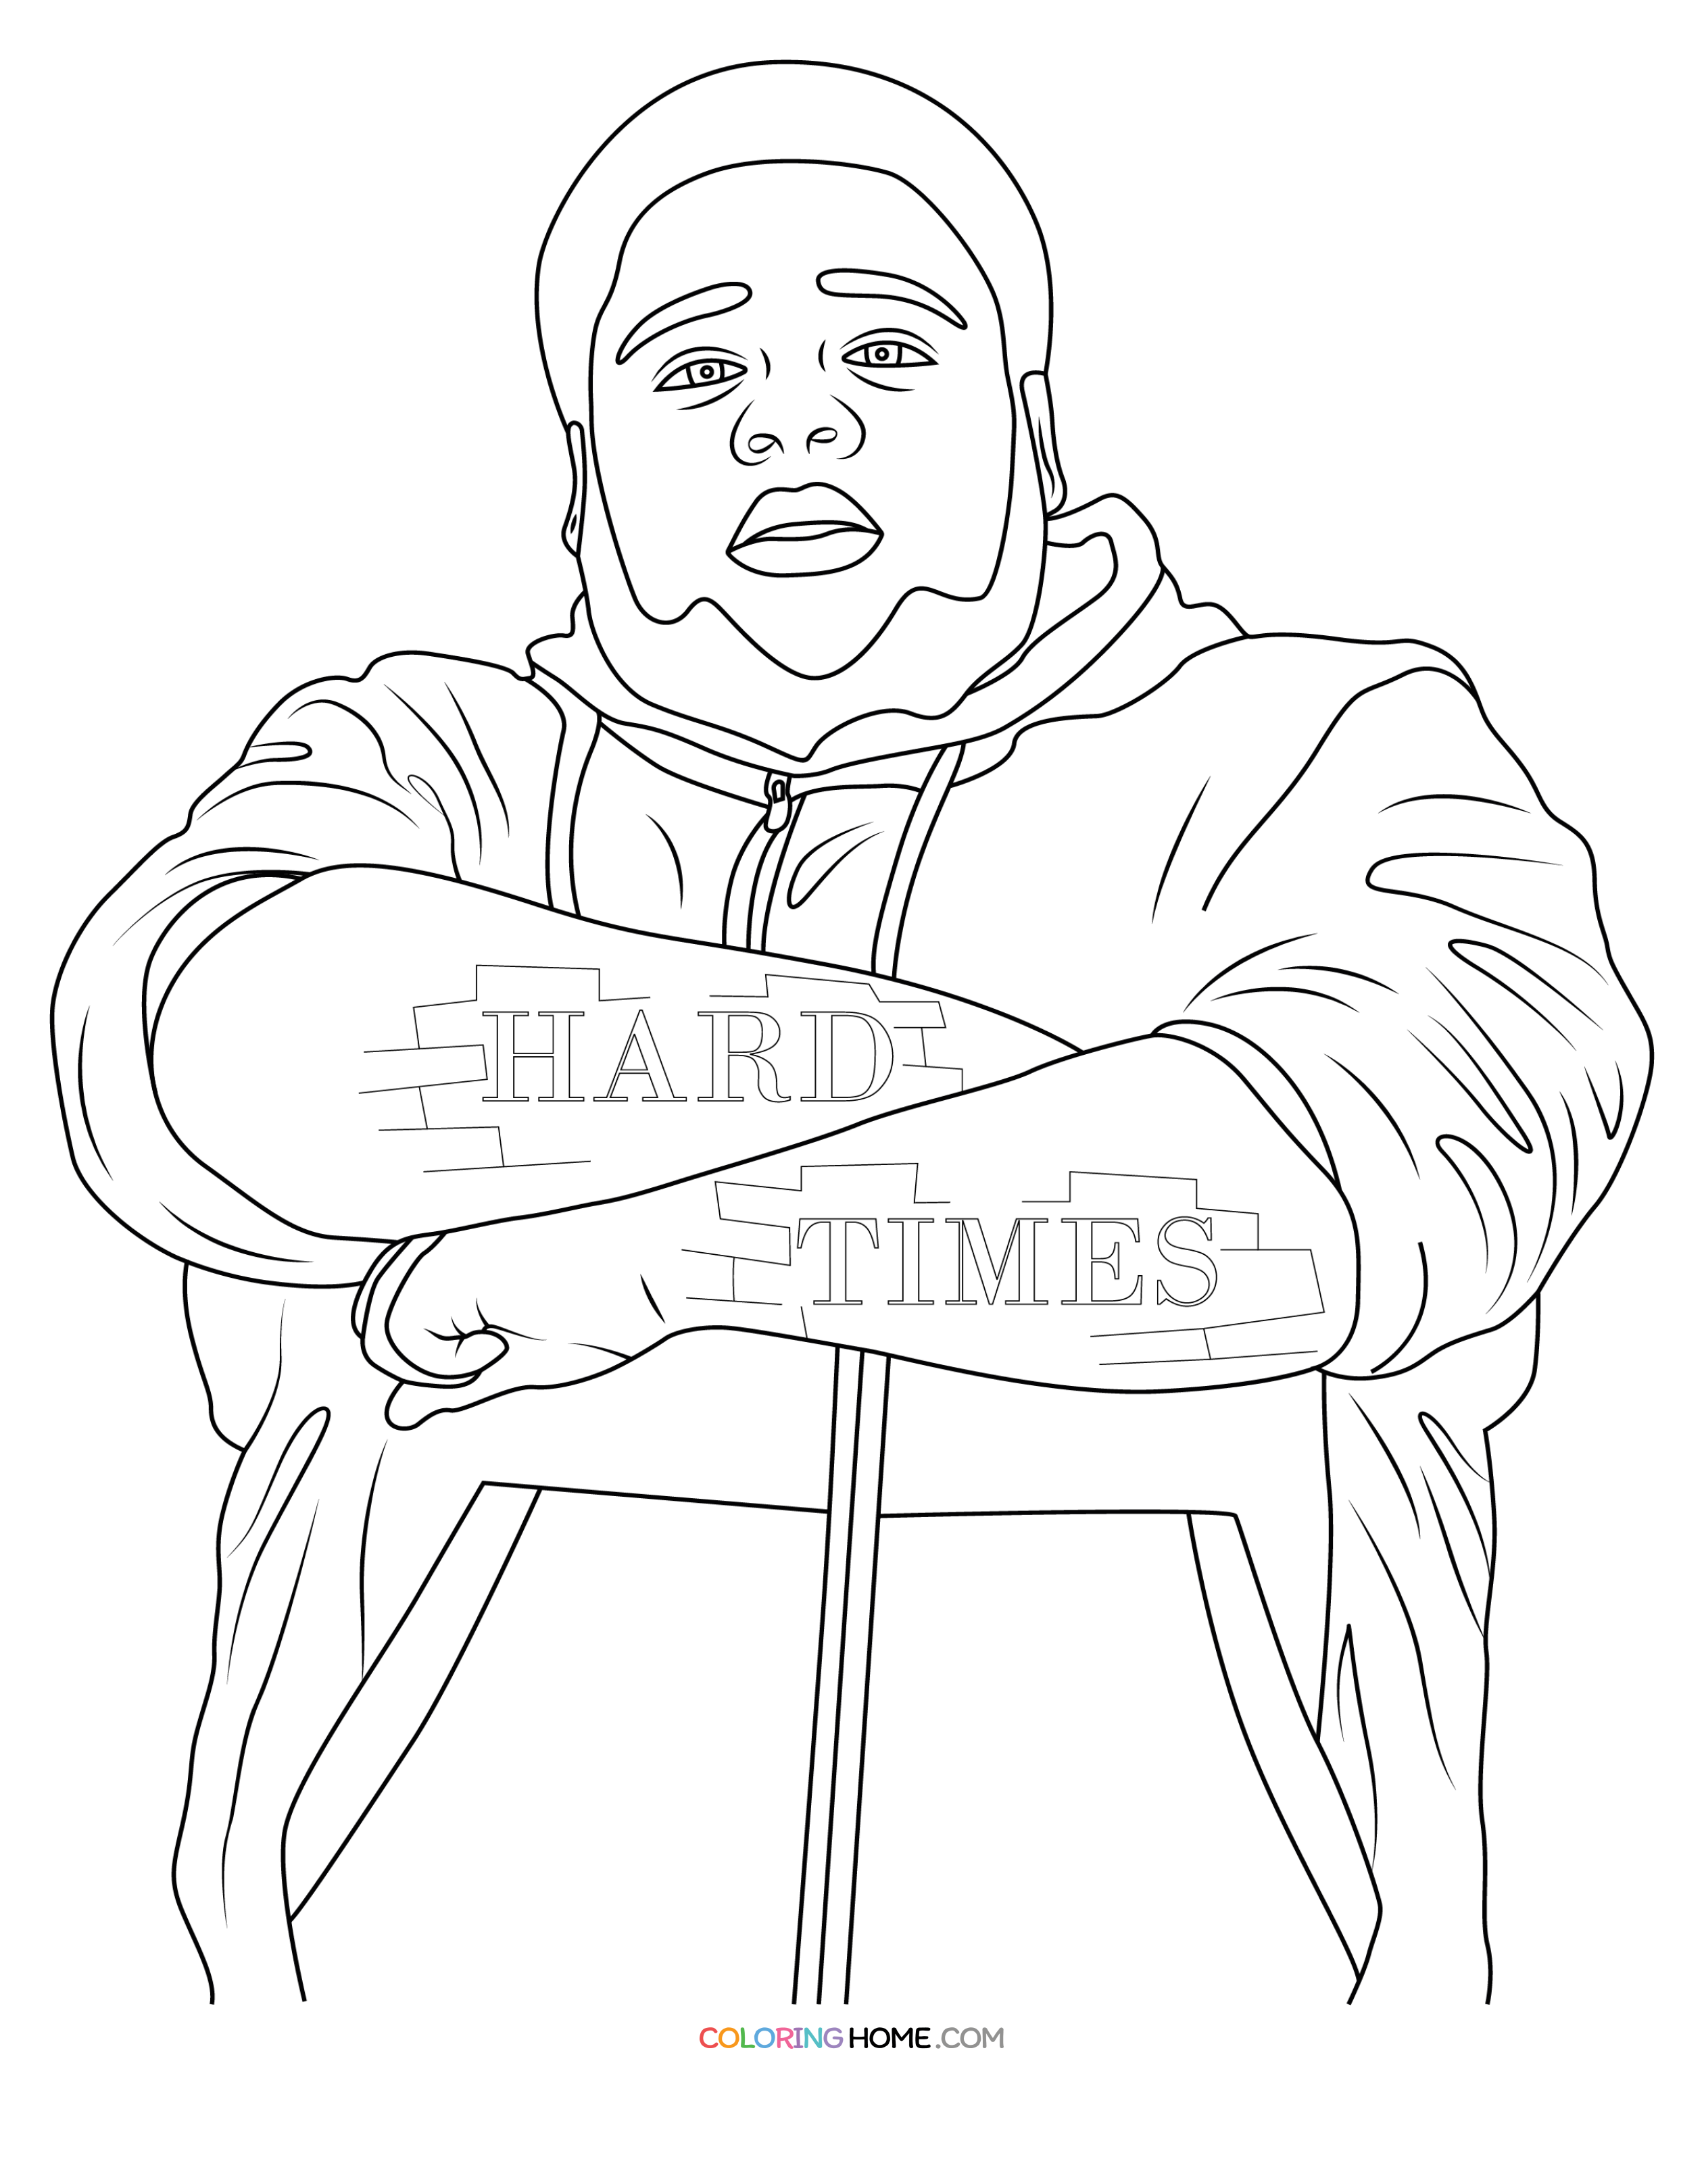 Rod Wave coloring page